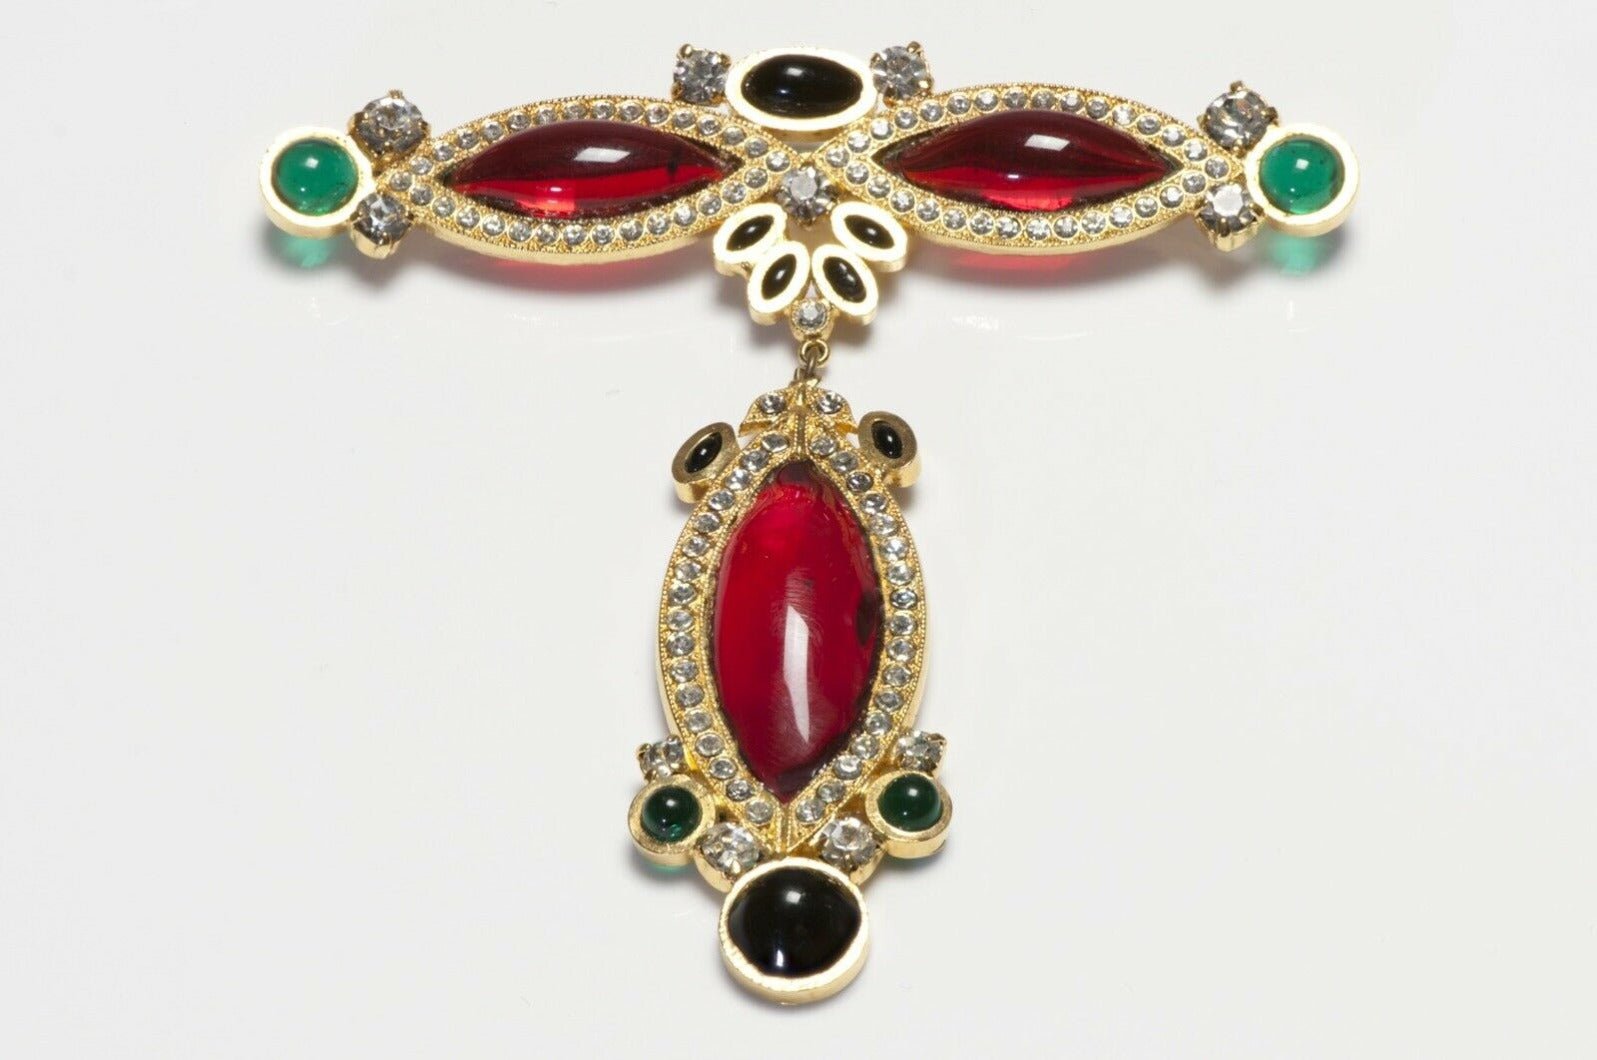 Butler & Wilson Red Black Green Poured Glass Crystal Brooch